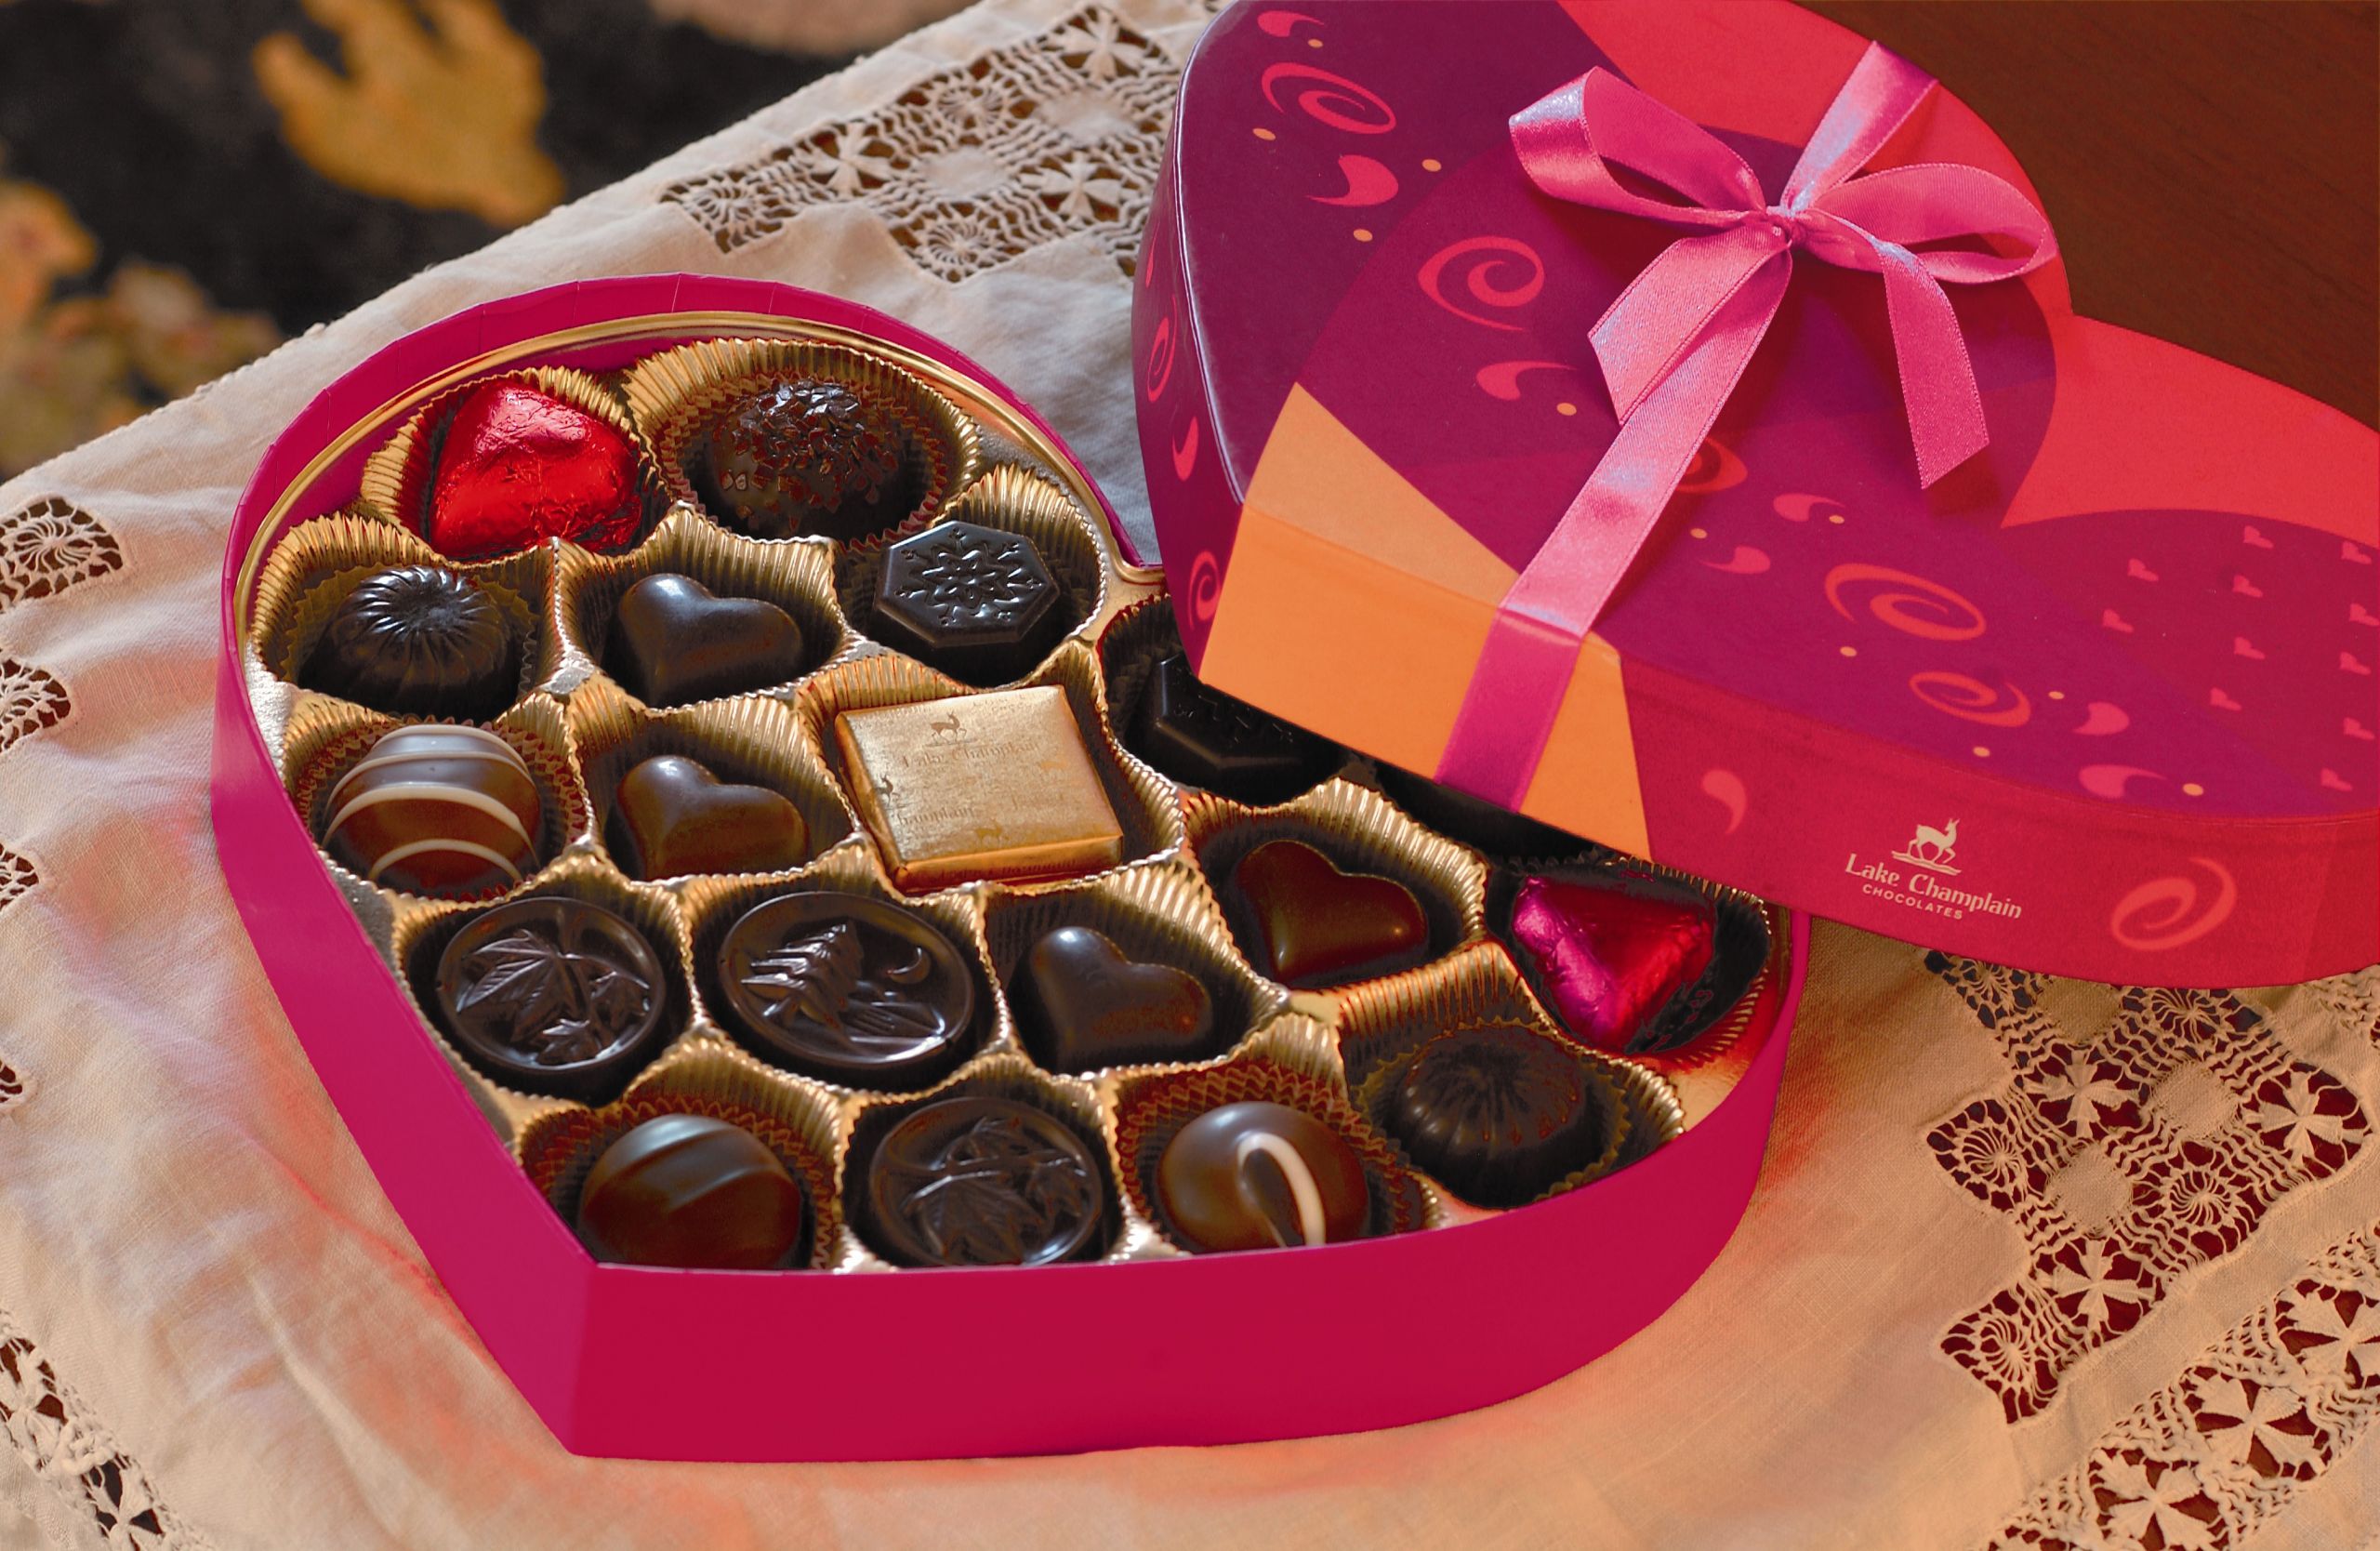 Valentines Day Candy Boxes
 Lake Champlain Chocolates Introduces Valentine’s Day Gifts